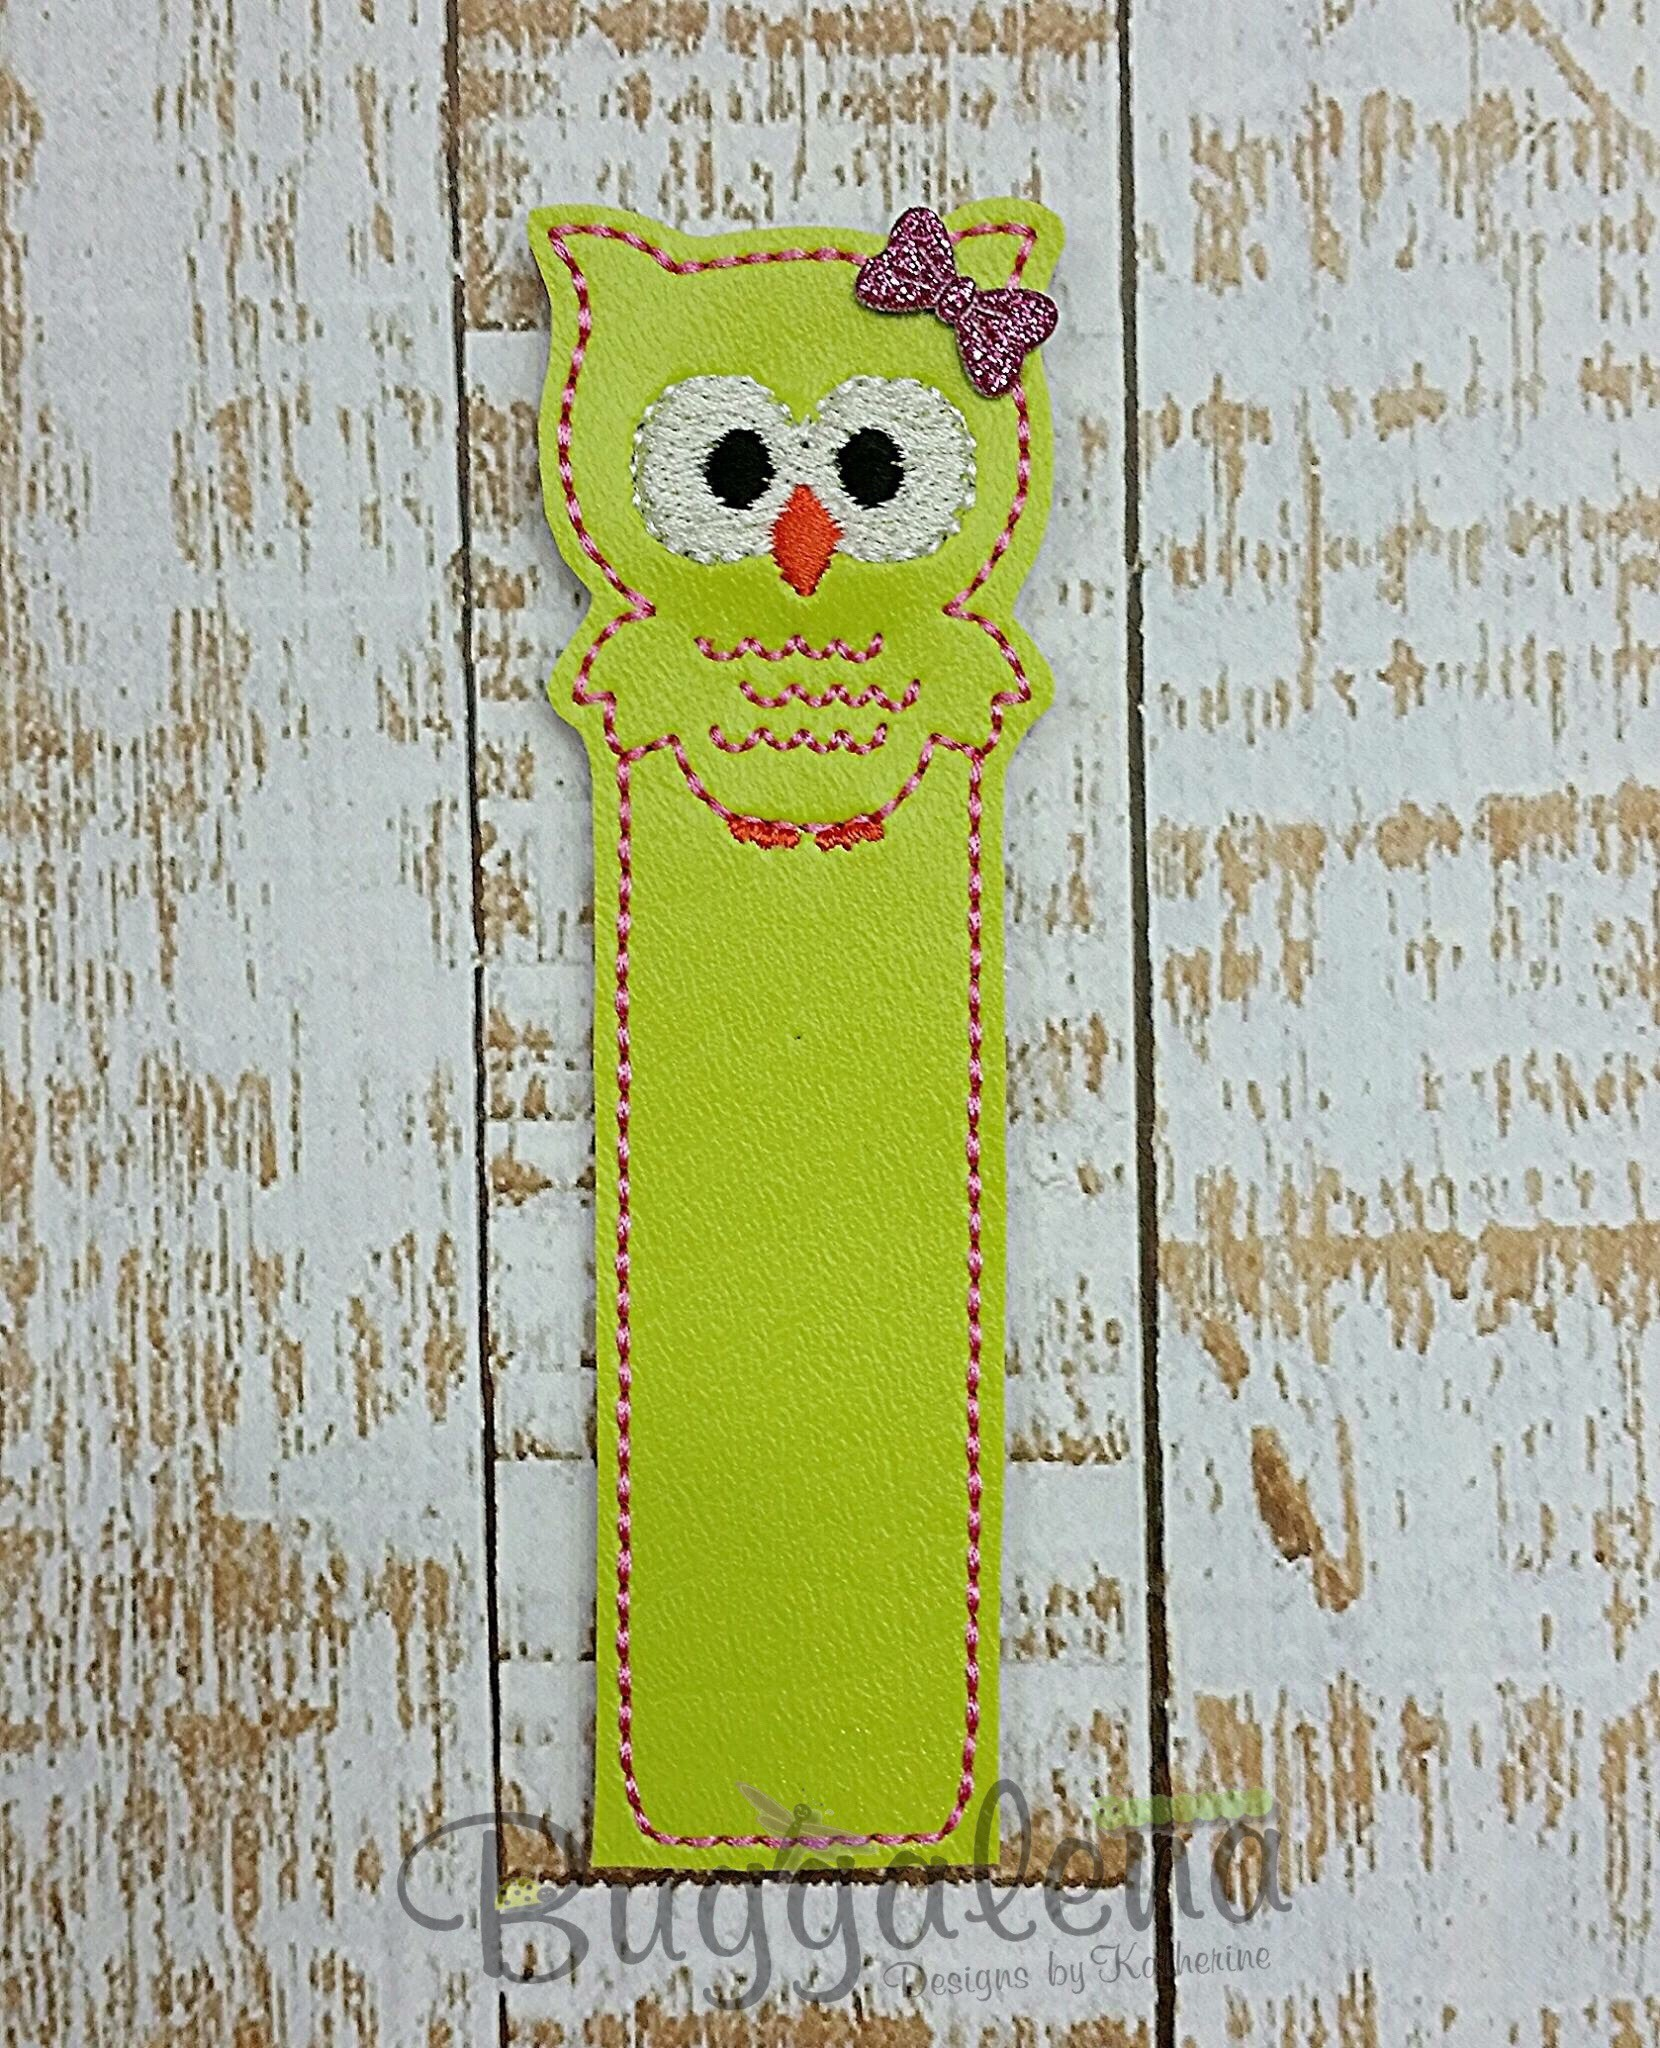 Owl Embroidery Pattern Owl Bookmark Embroidery Design